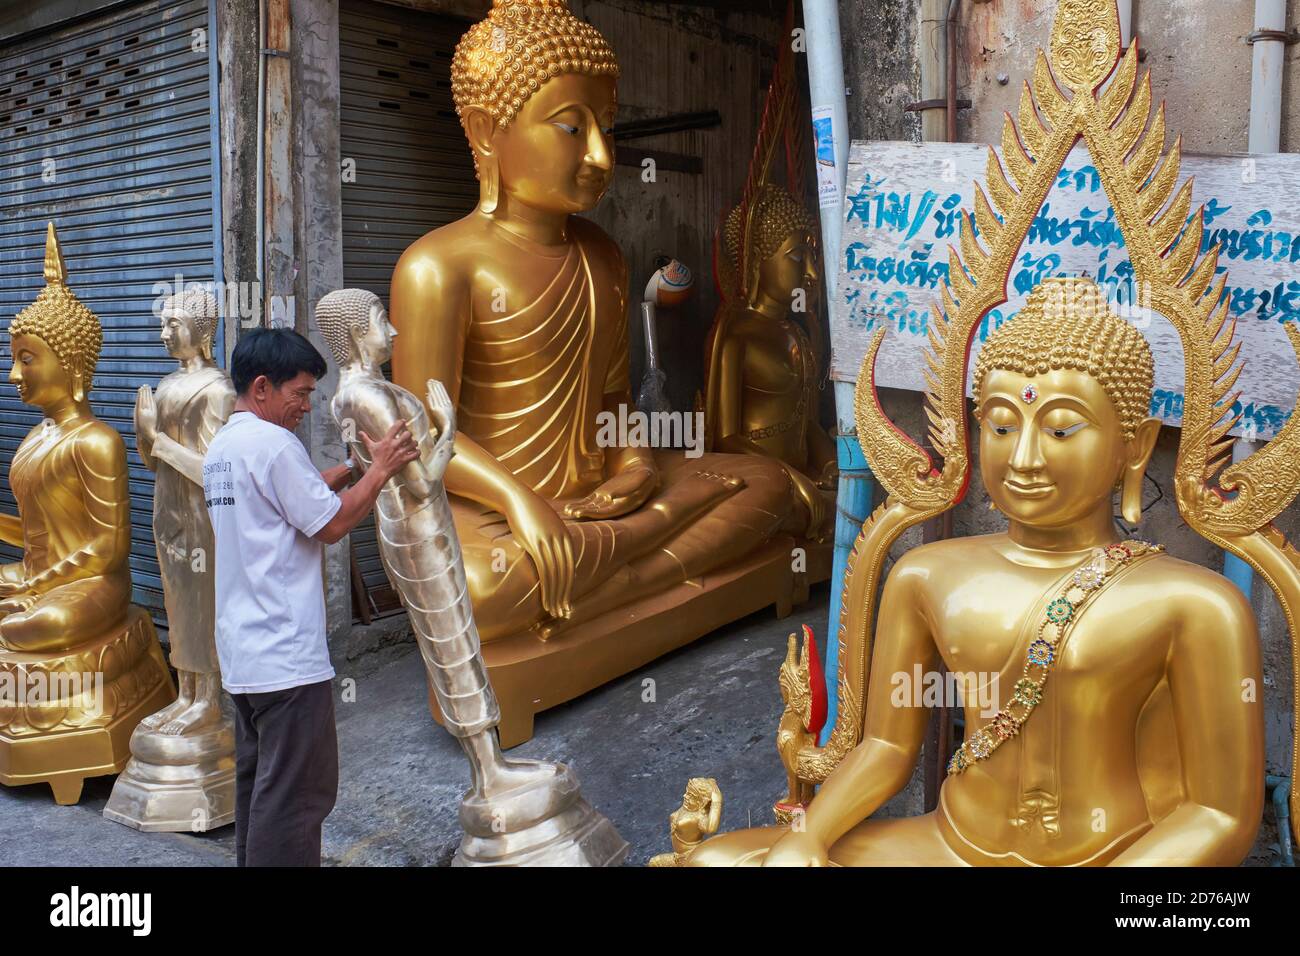 Next to several finished Buddha statues, an employee of a Buddha factory moves one statue for some final work; Bamrung Muang Rd., Bangkok, Thailand Stock Photo